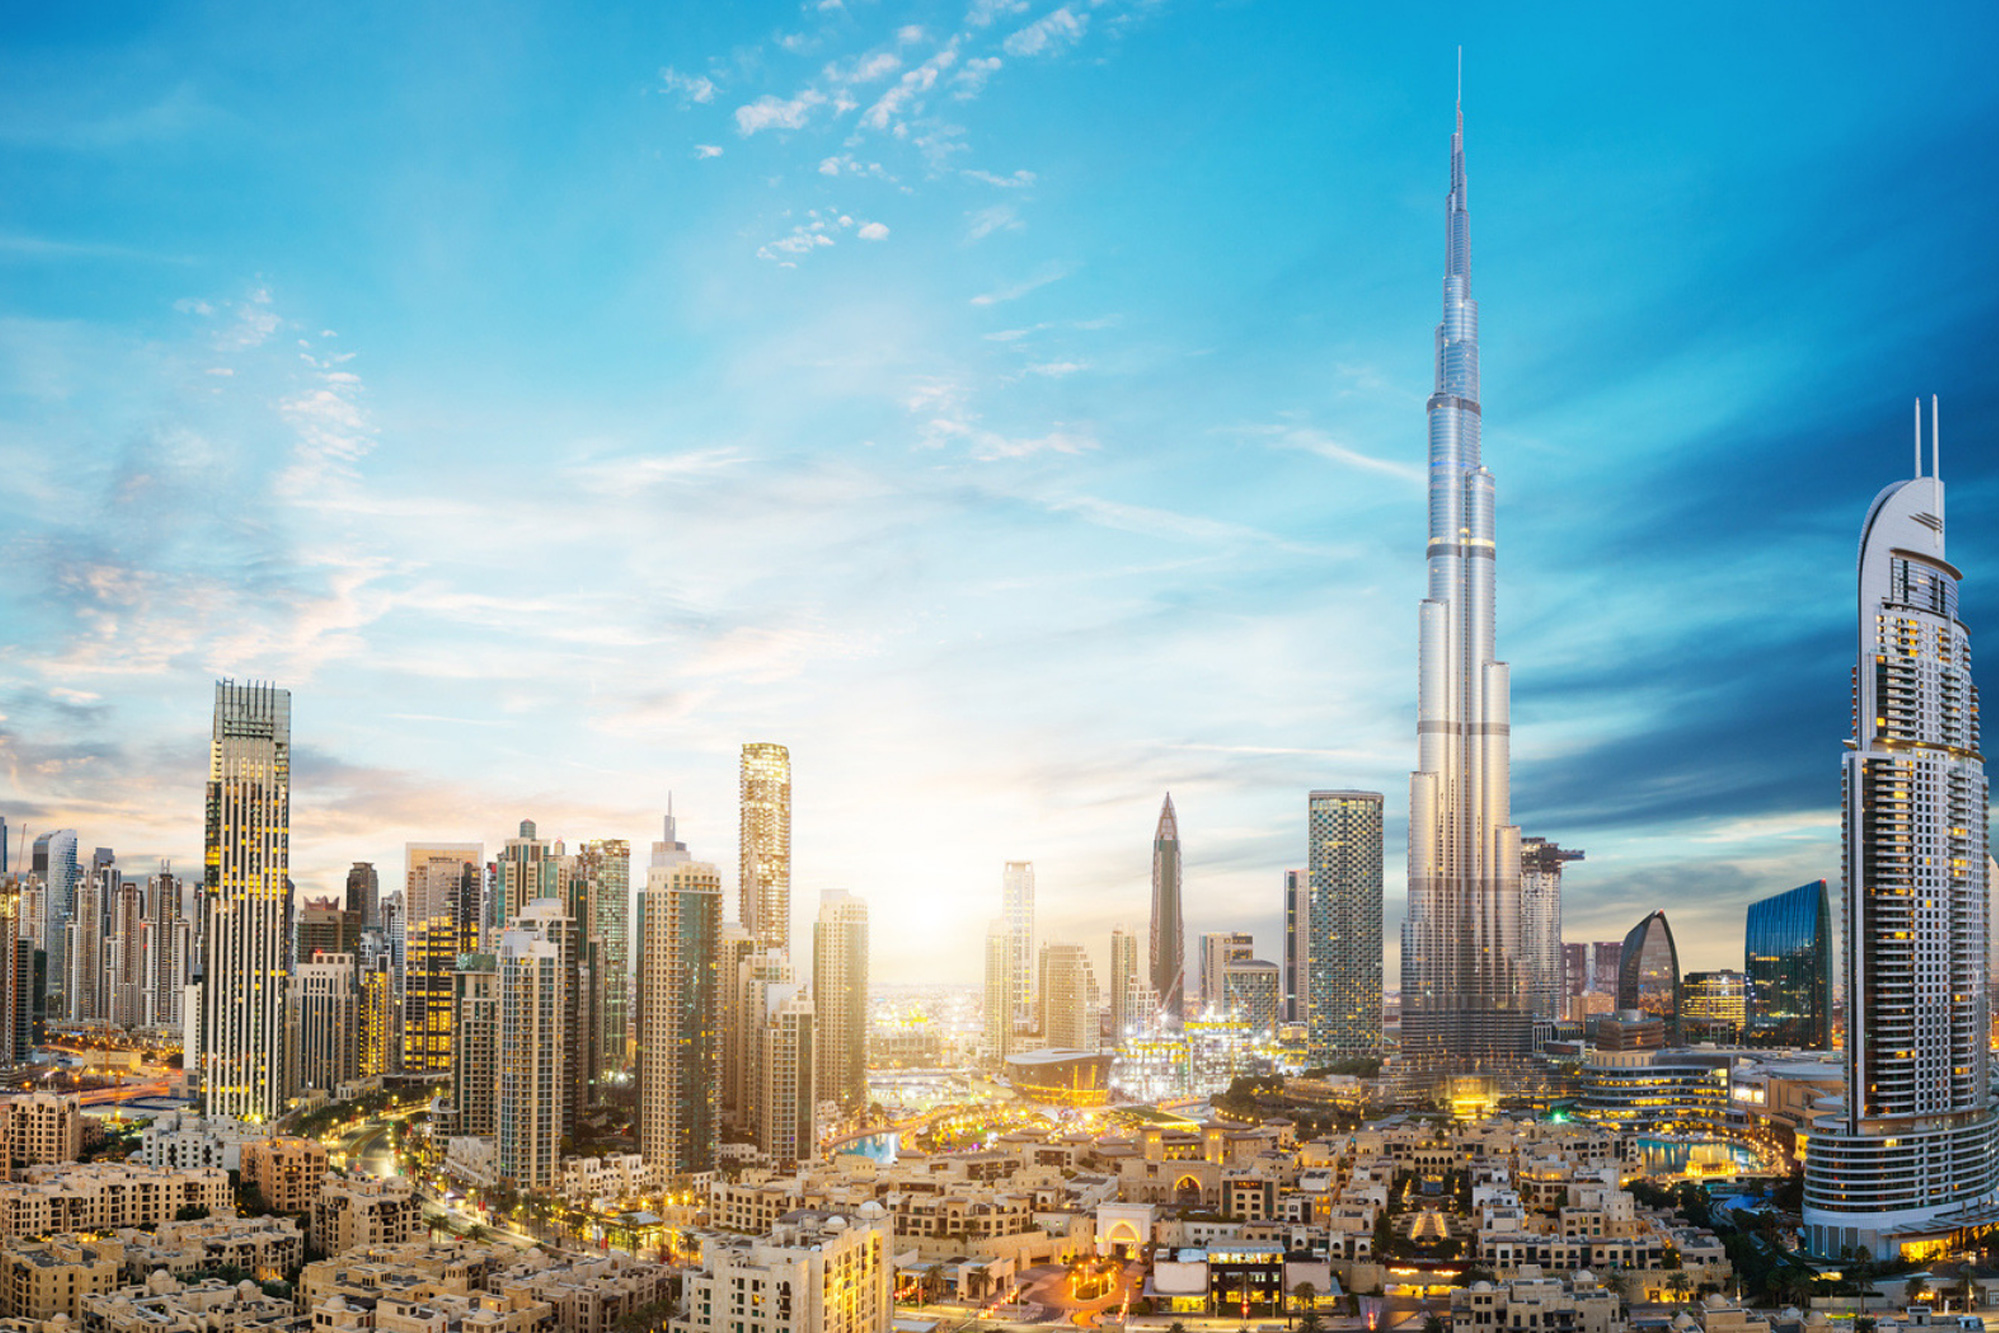 What are the Various DED License Options For Setting Up a Business in Dubai?